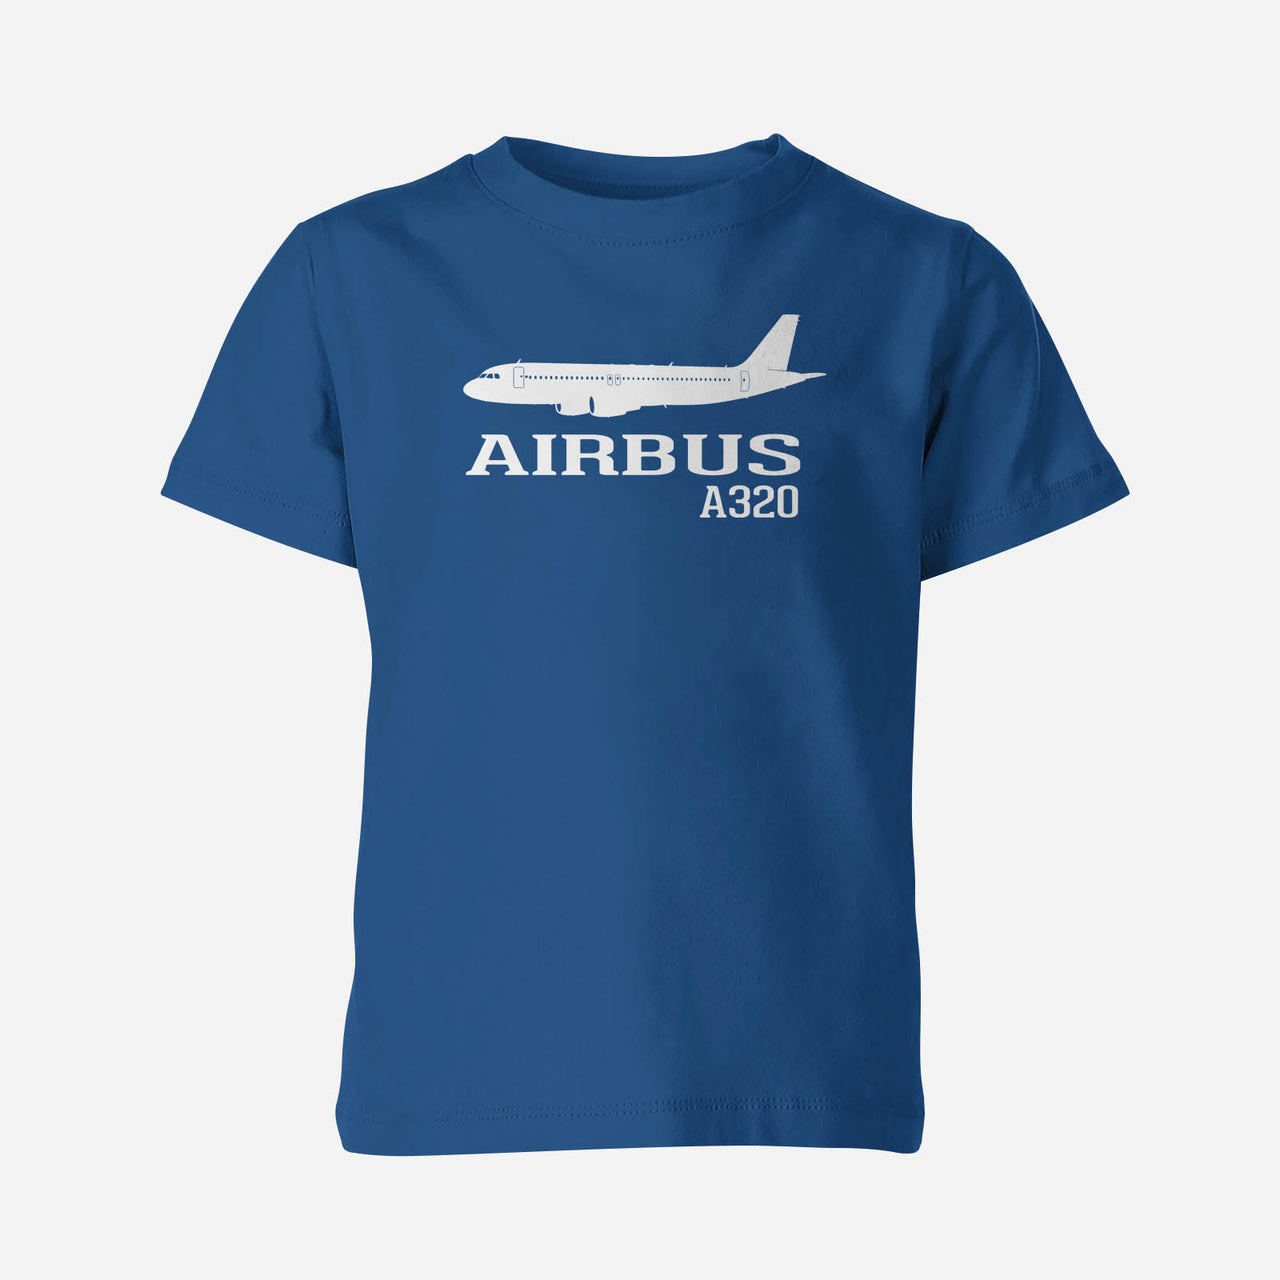 Airbus A320 Printed & Designed Children T-Shirts